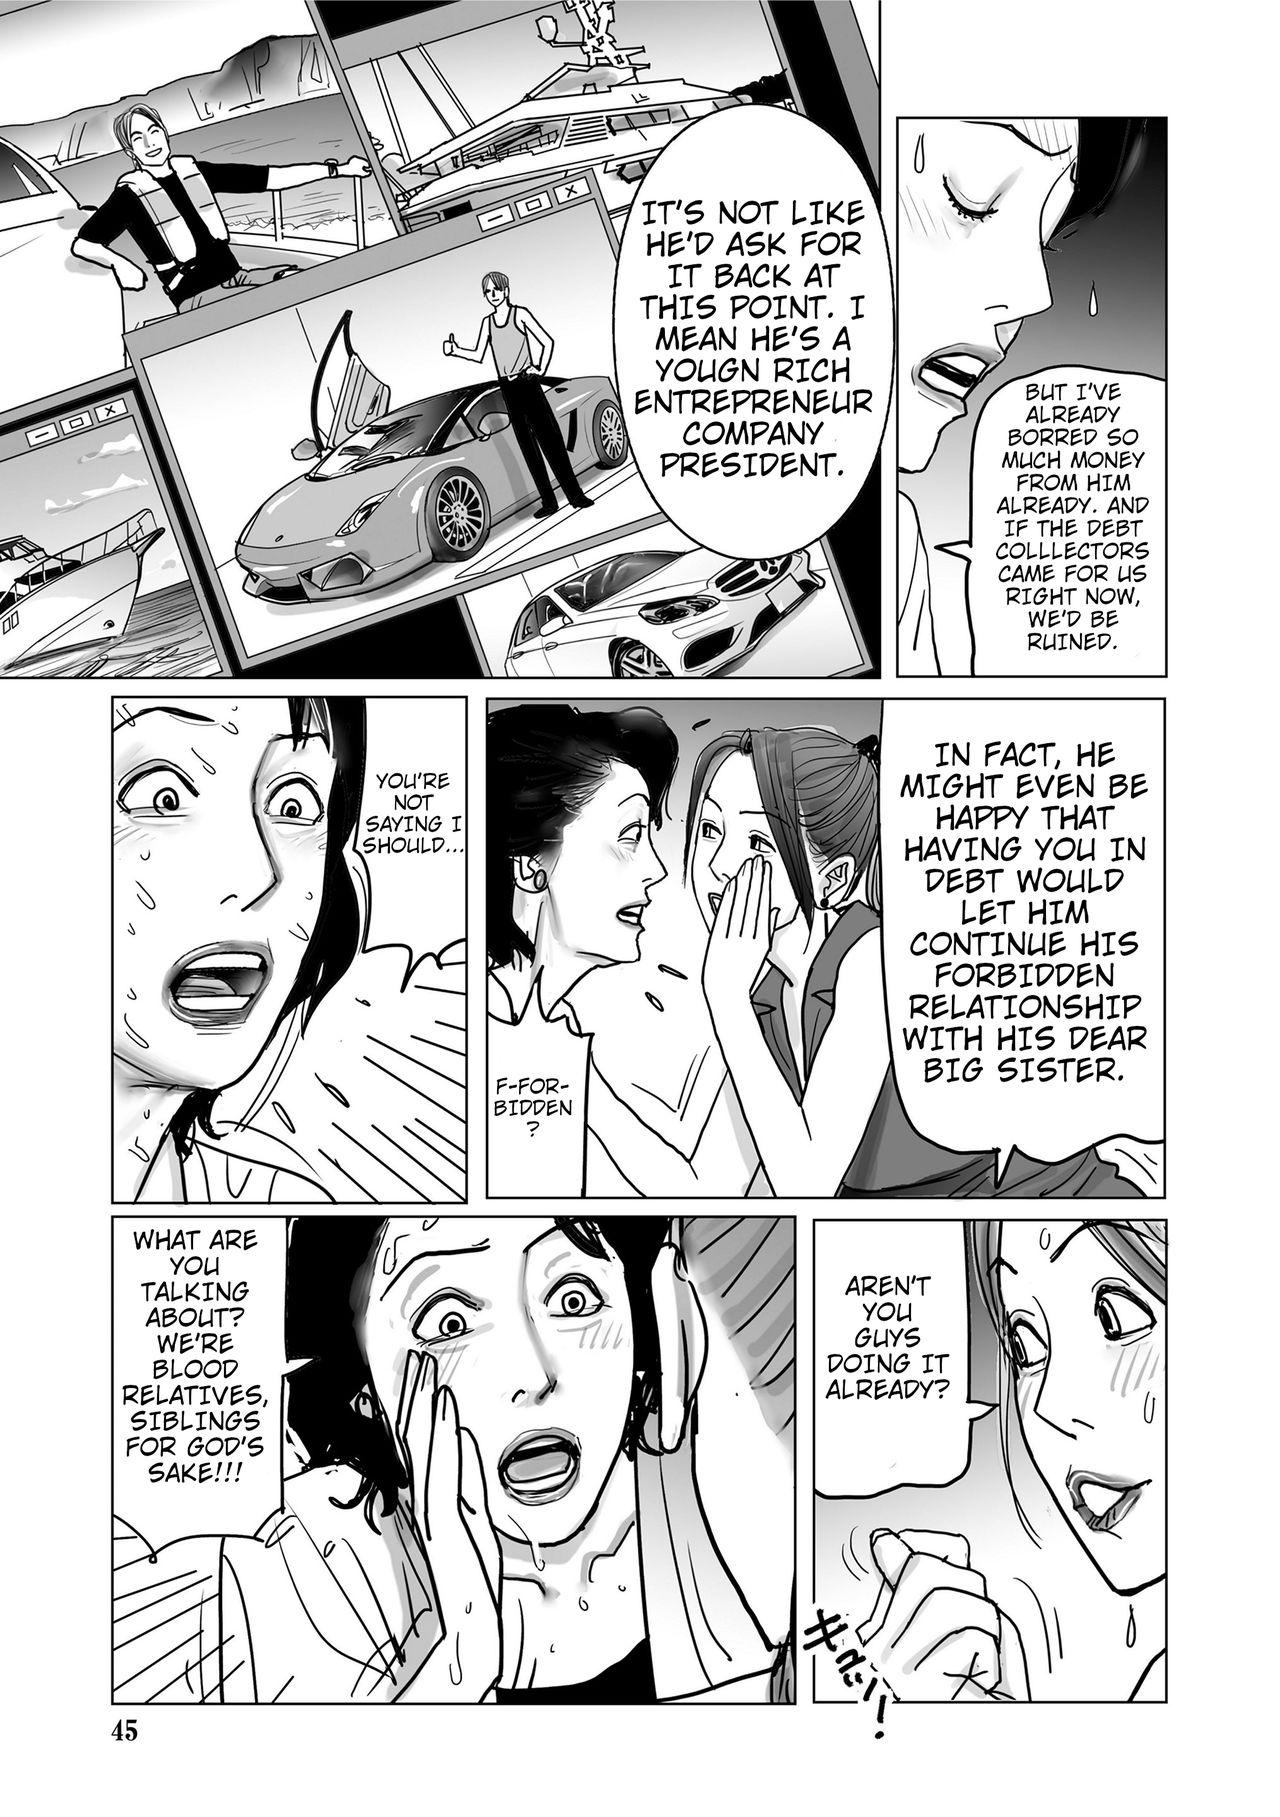 Sucks Kinshinkan De Seikatsuhi wo Eru Hizunda Kyodai | The Twisted Big Sister Who does Incest With Her Little Brother to Get By Pervs - Page 7